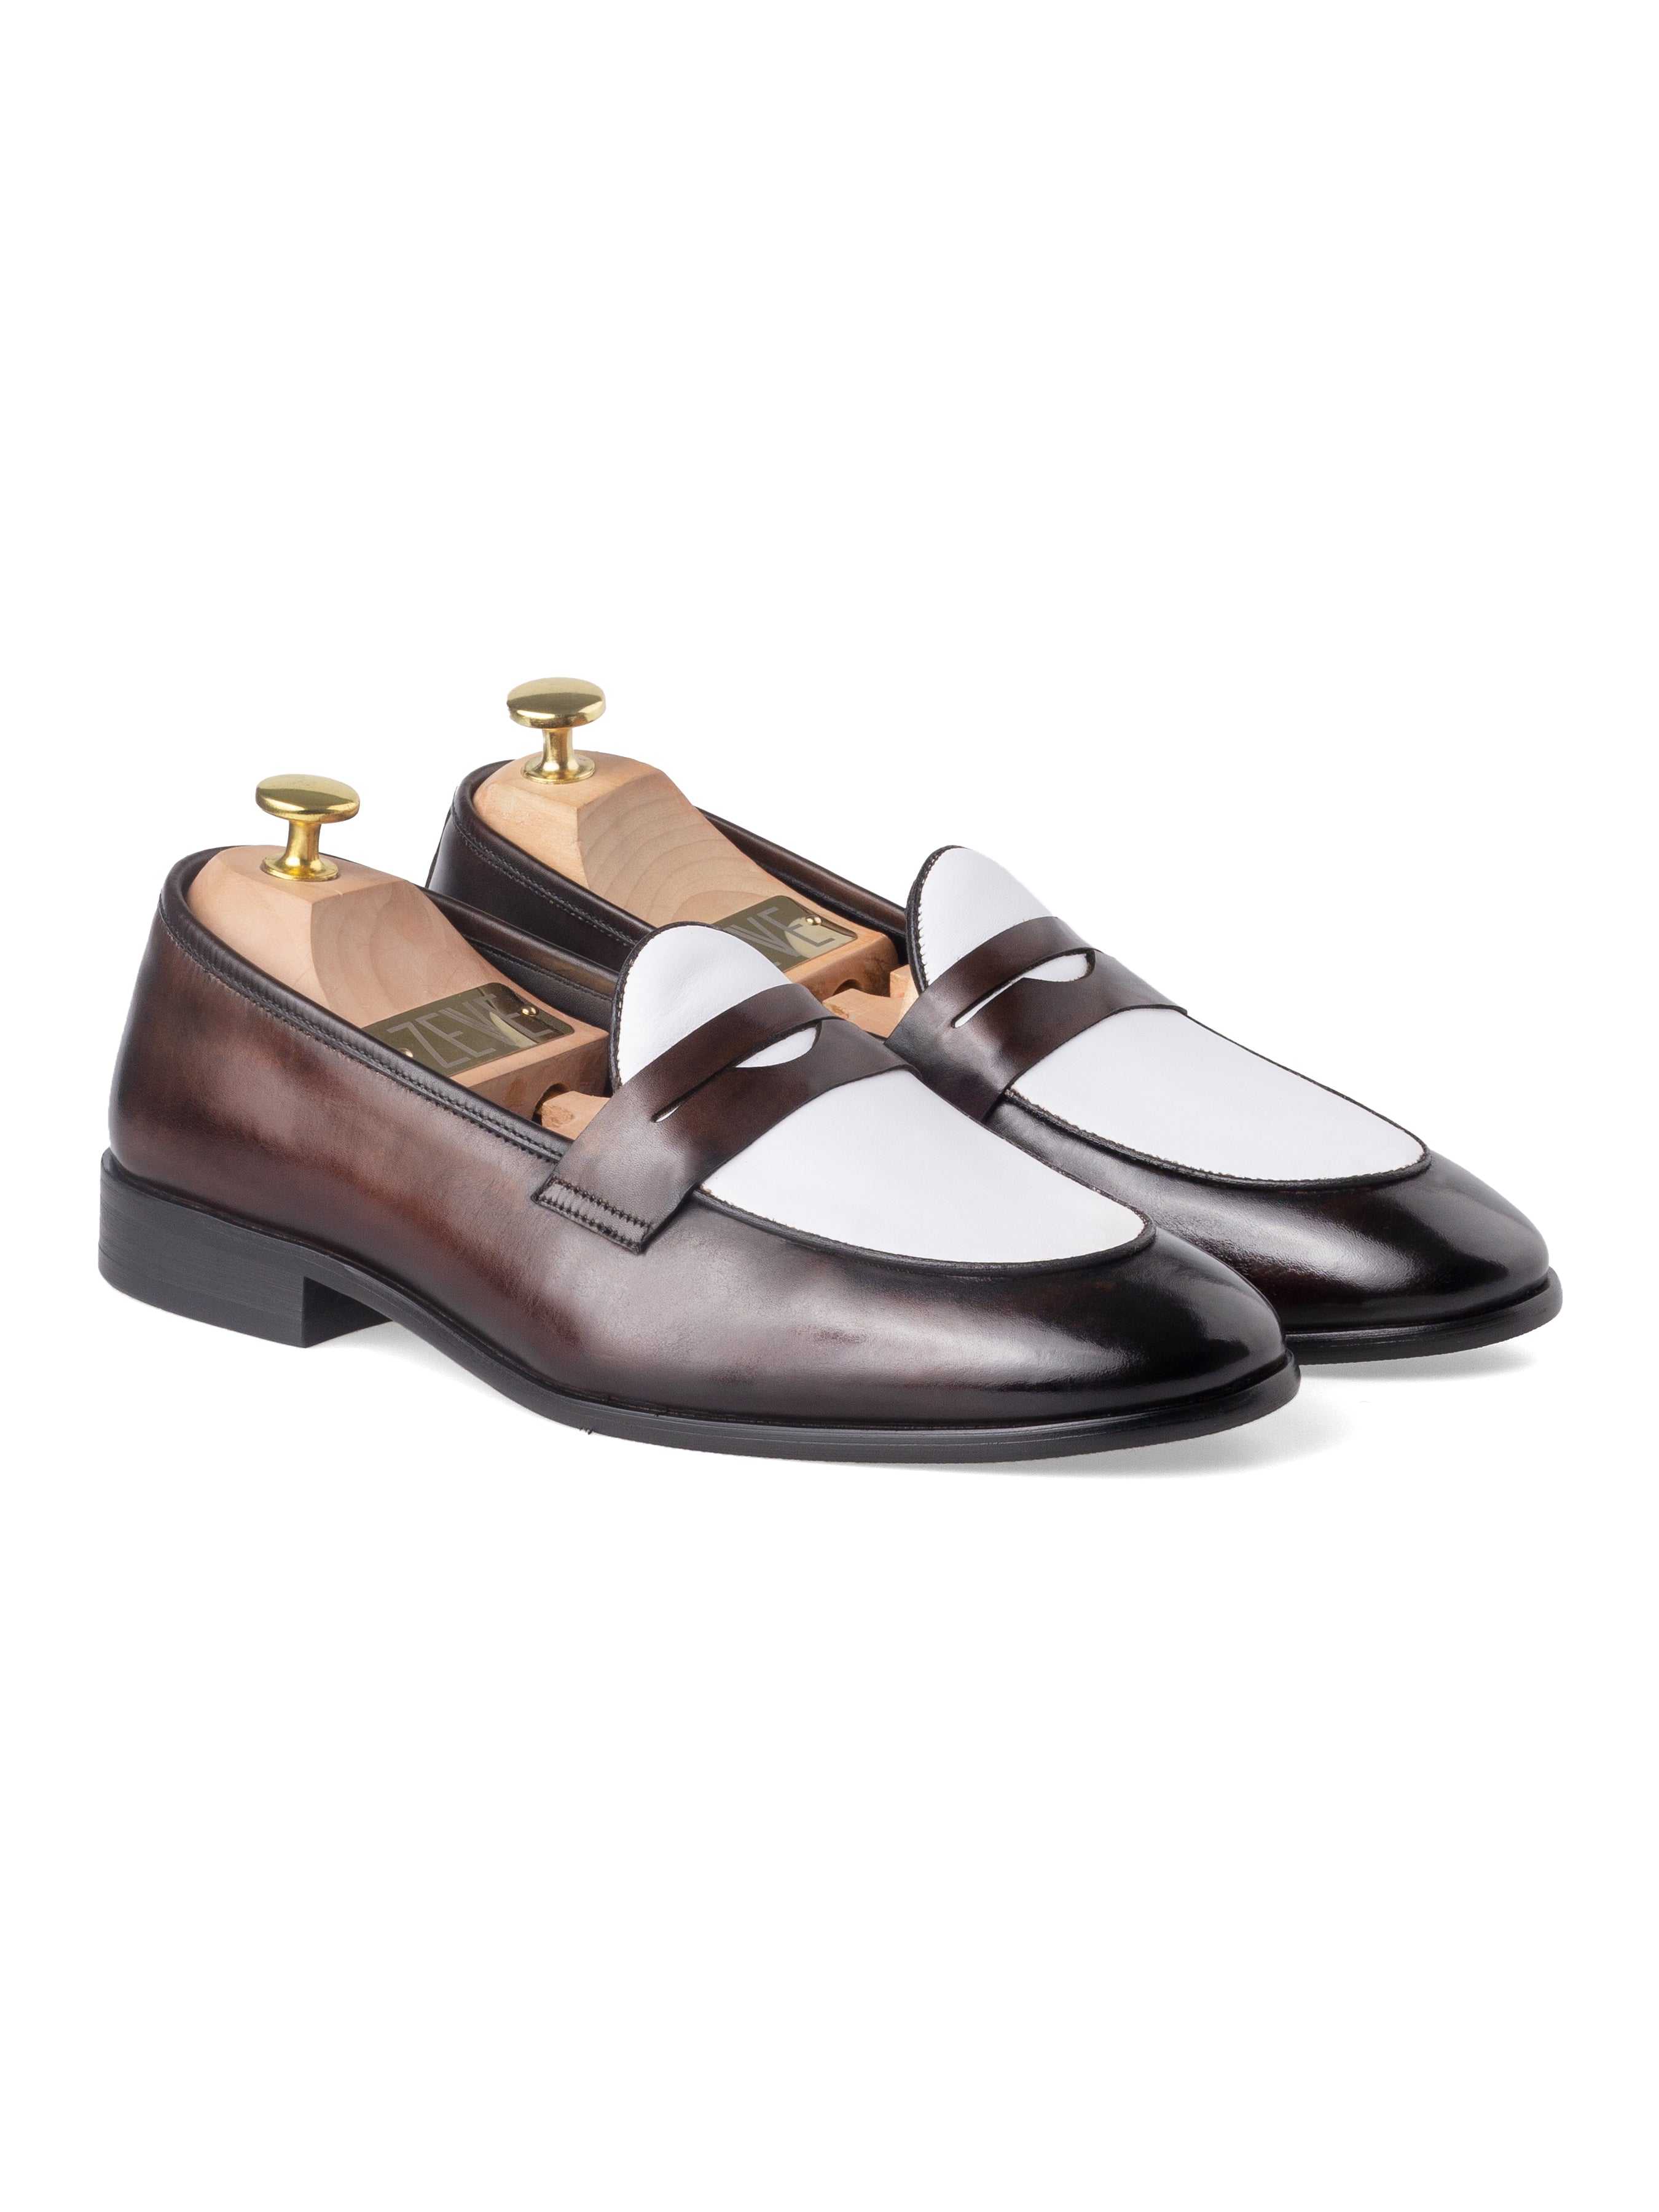 Belgian Loafer Penny Duo - Coffee Patina & White (Hand Painted Patina)